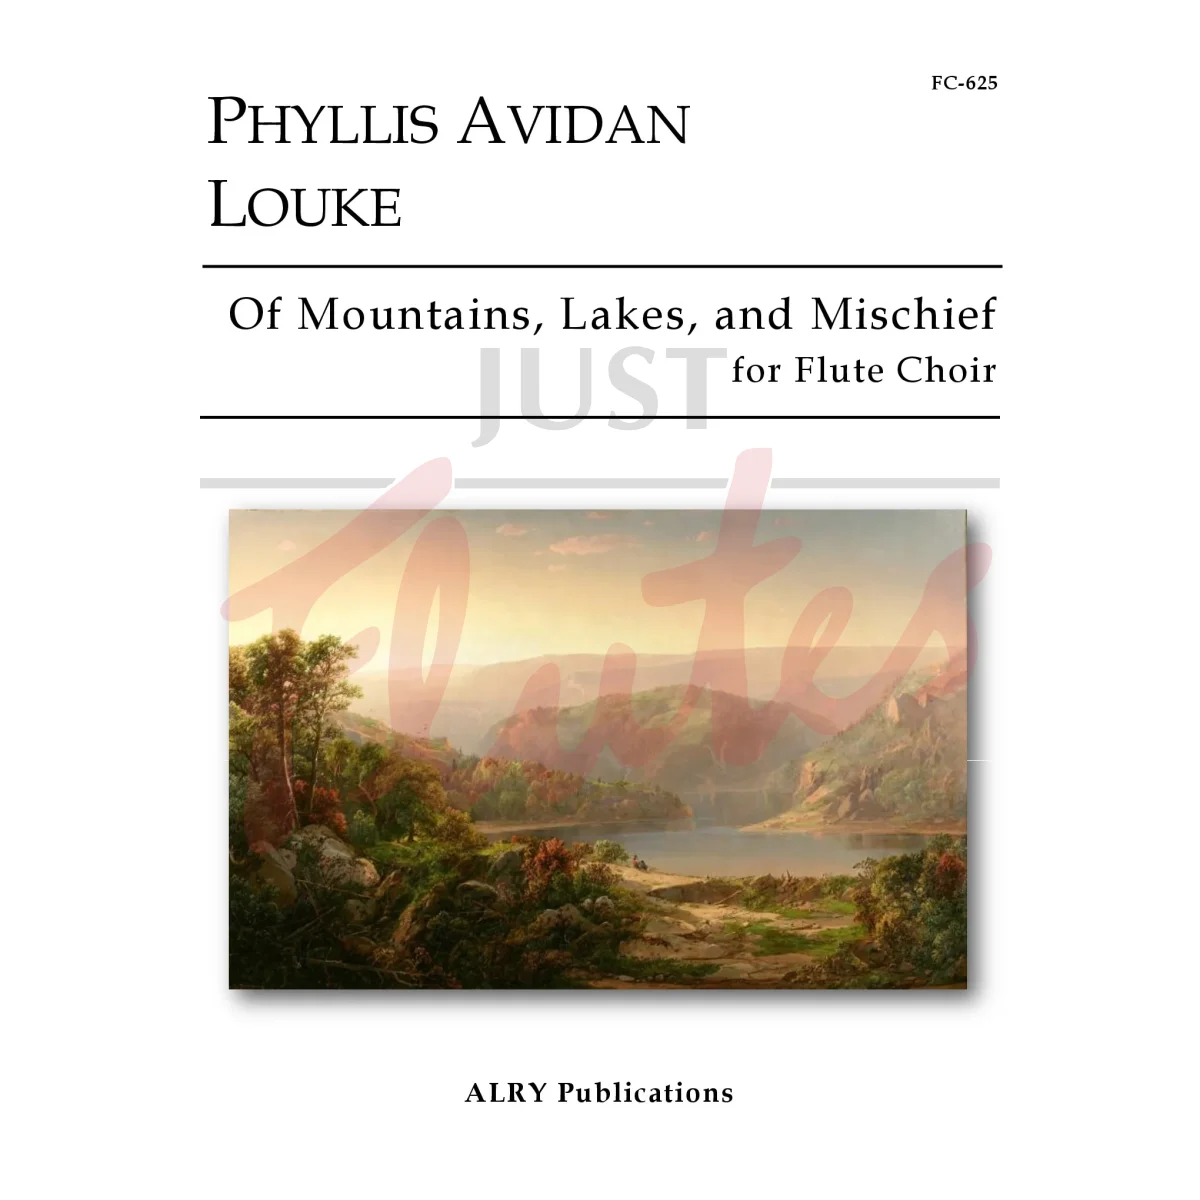 Of Mountains, Lakes, and Mischief for Flute Choir